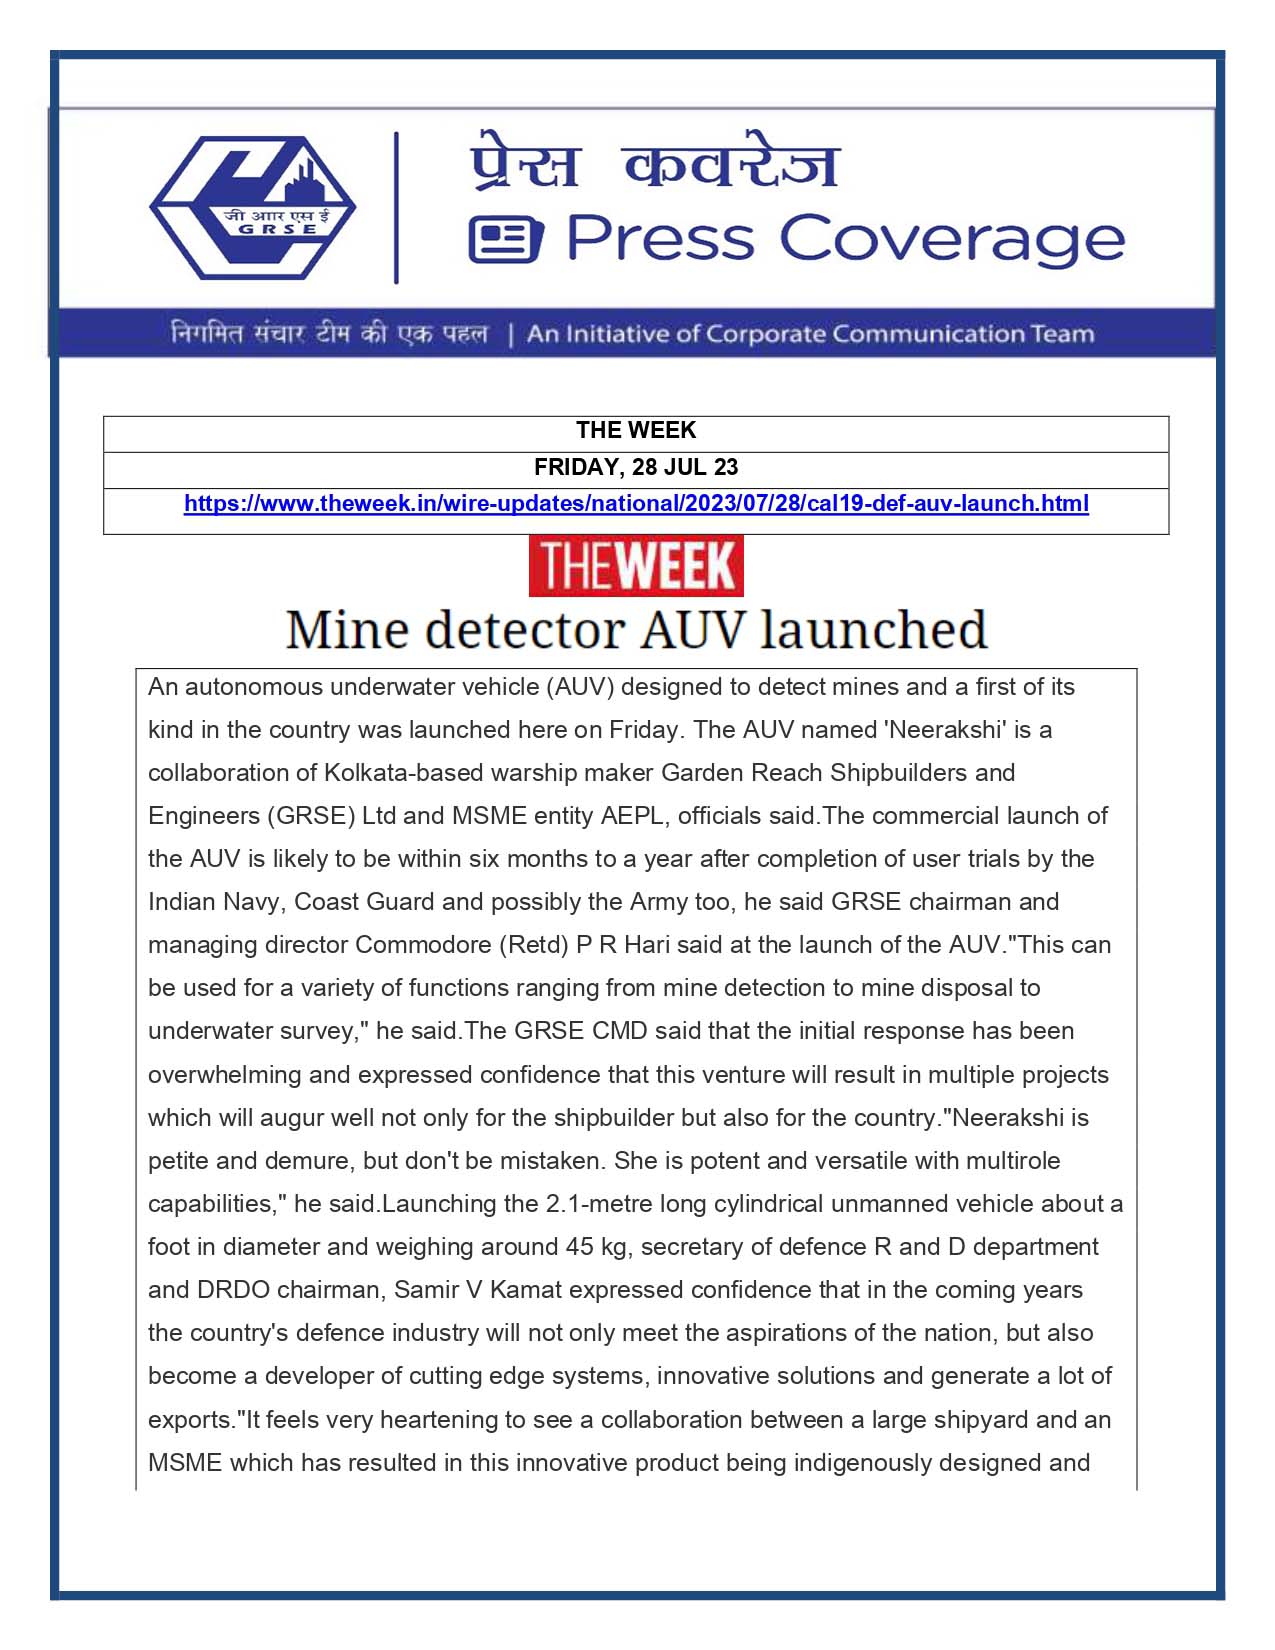 Press Coverage : The Week, 28 Jul 23 : Mine Detector AUV Launched